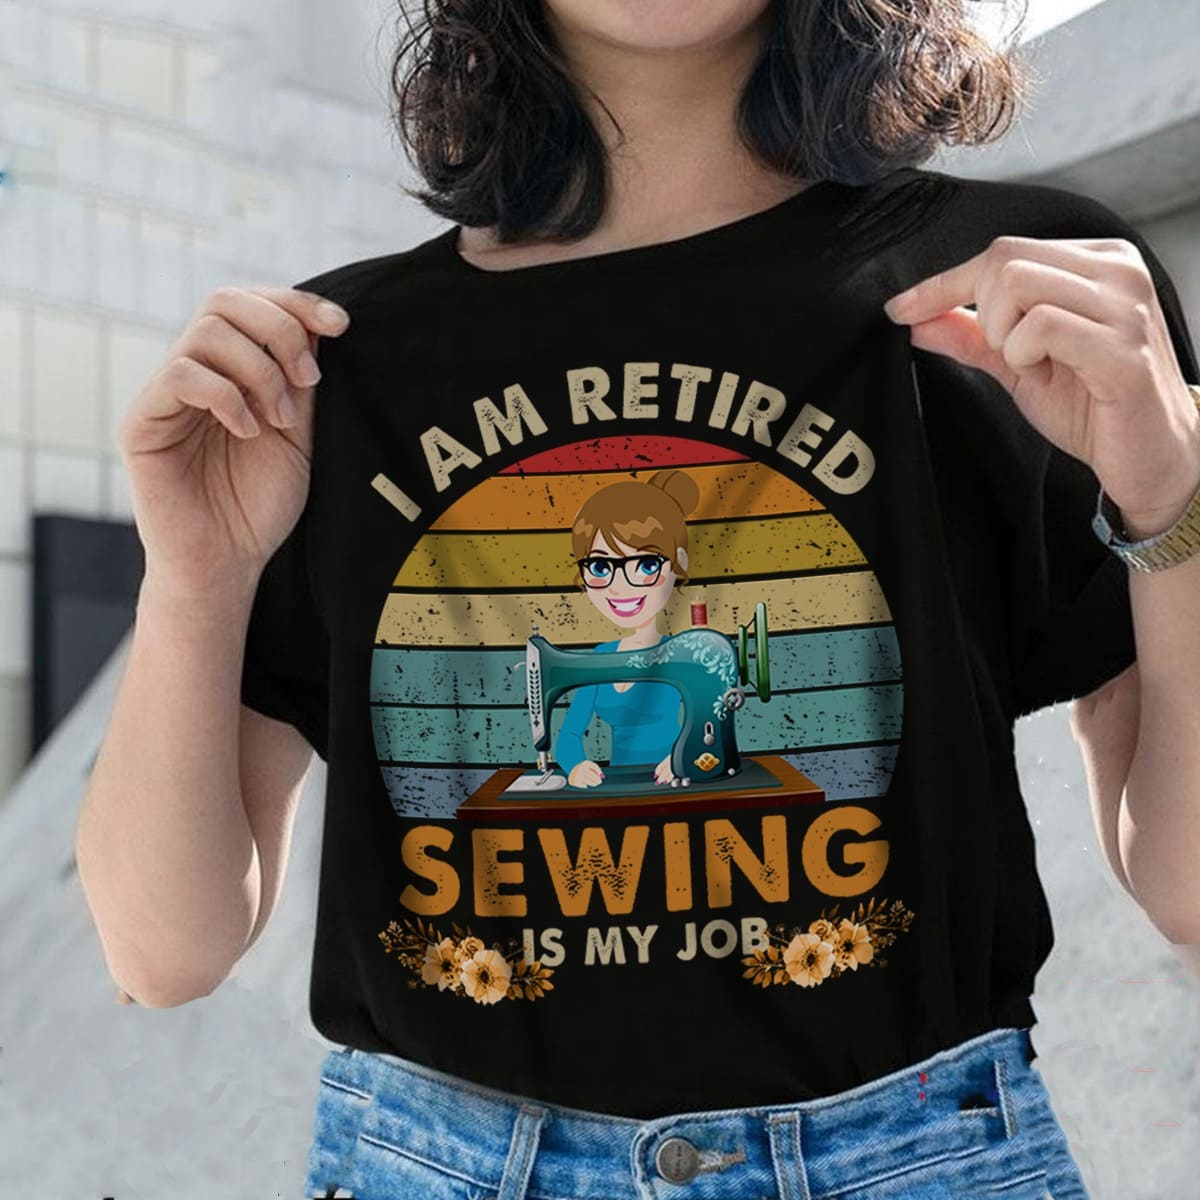 I am retired sewing is my job - Retired woman T-shirt, gift for sewing person